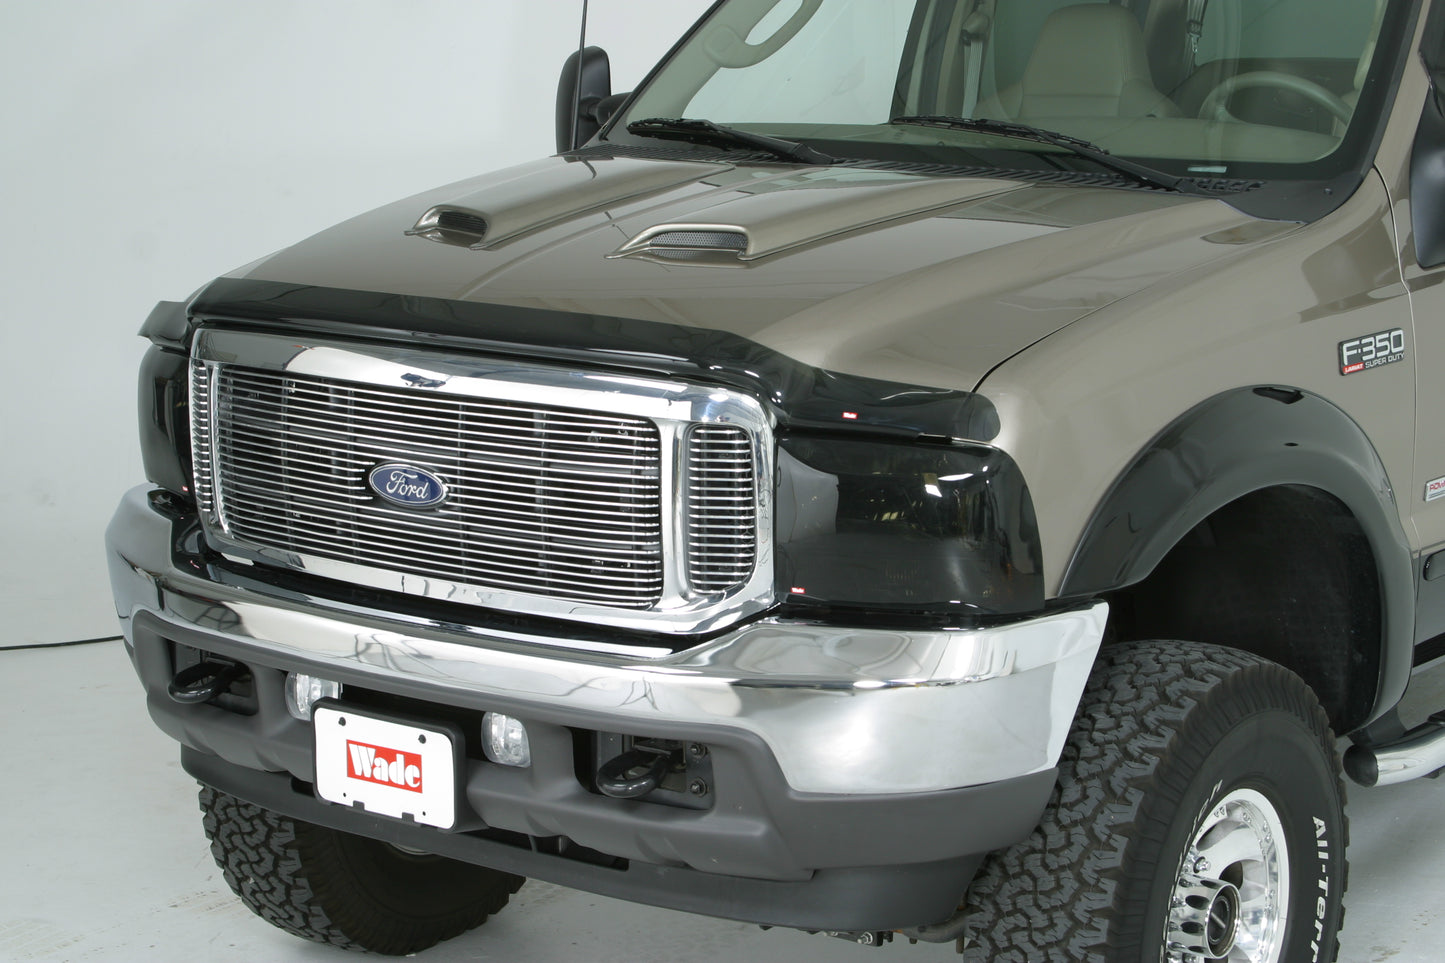 1984 Ford F-Series Head Light Covers